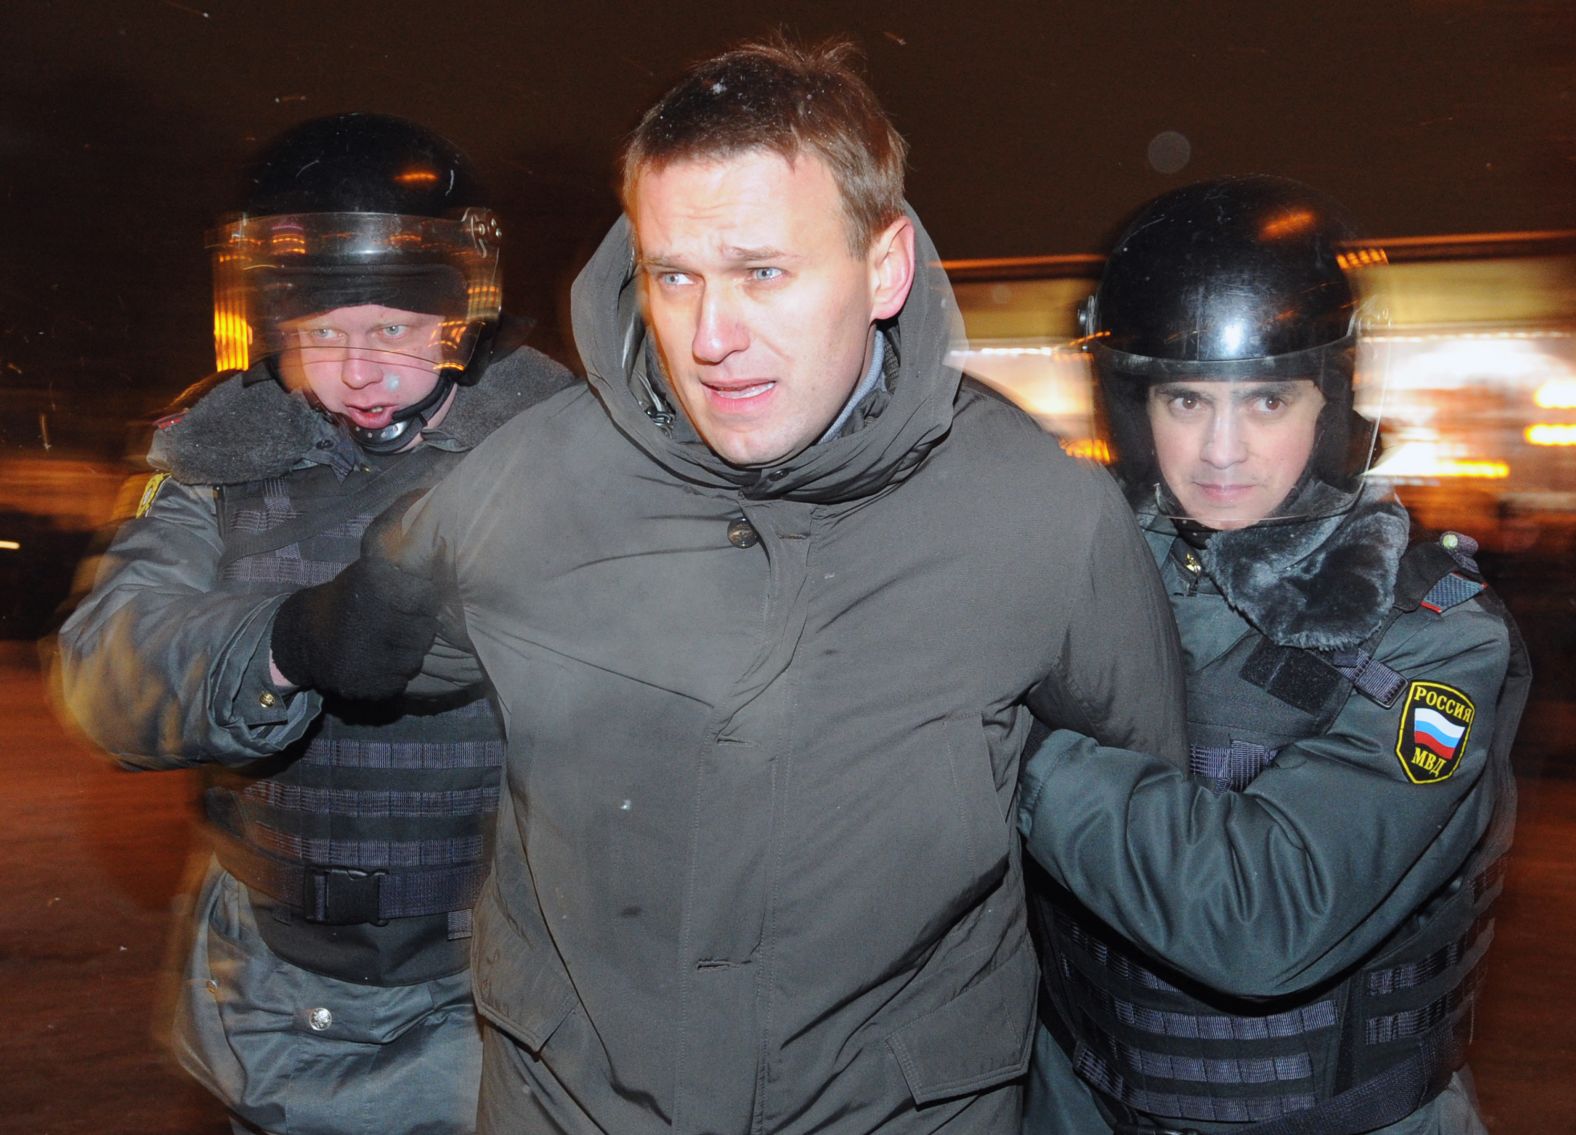 Police officers detain Navalny during a protest in Moscow in March 2012. This was after Putin had been elected president again.